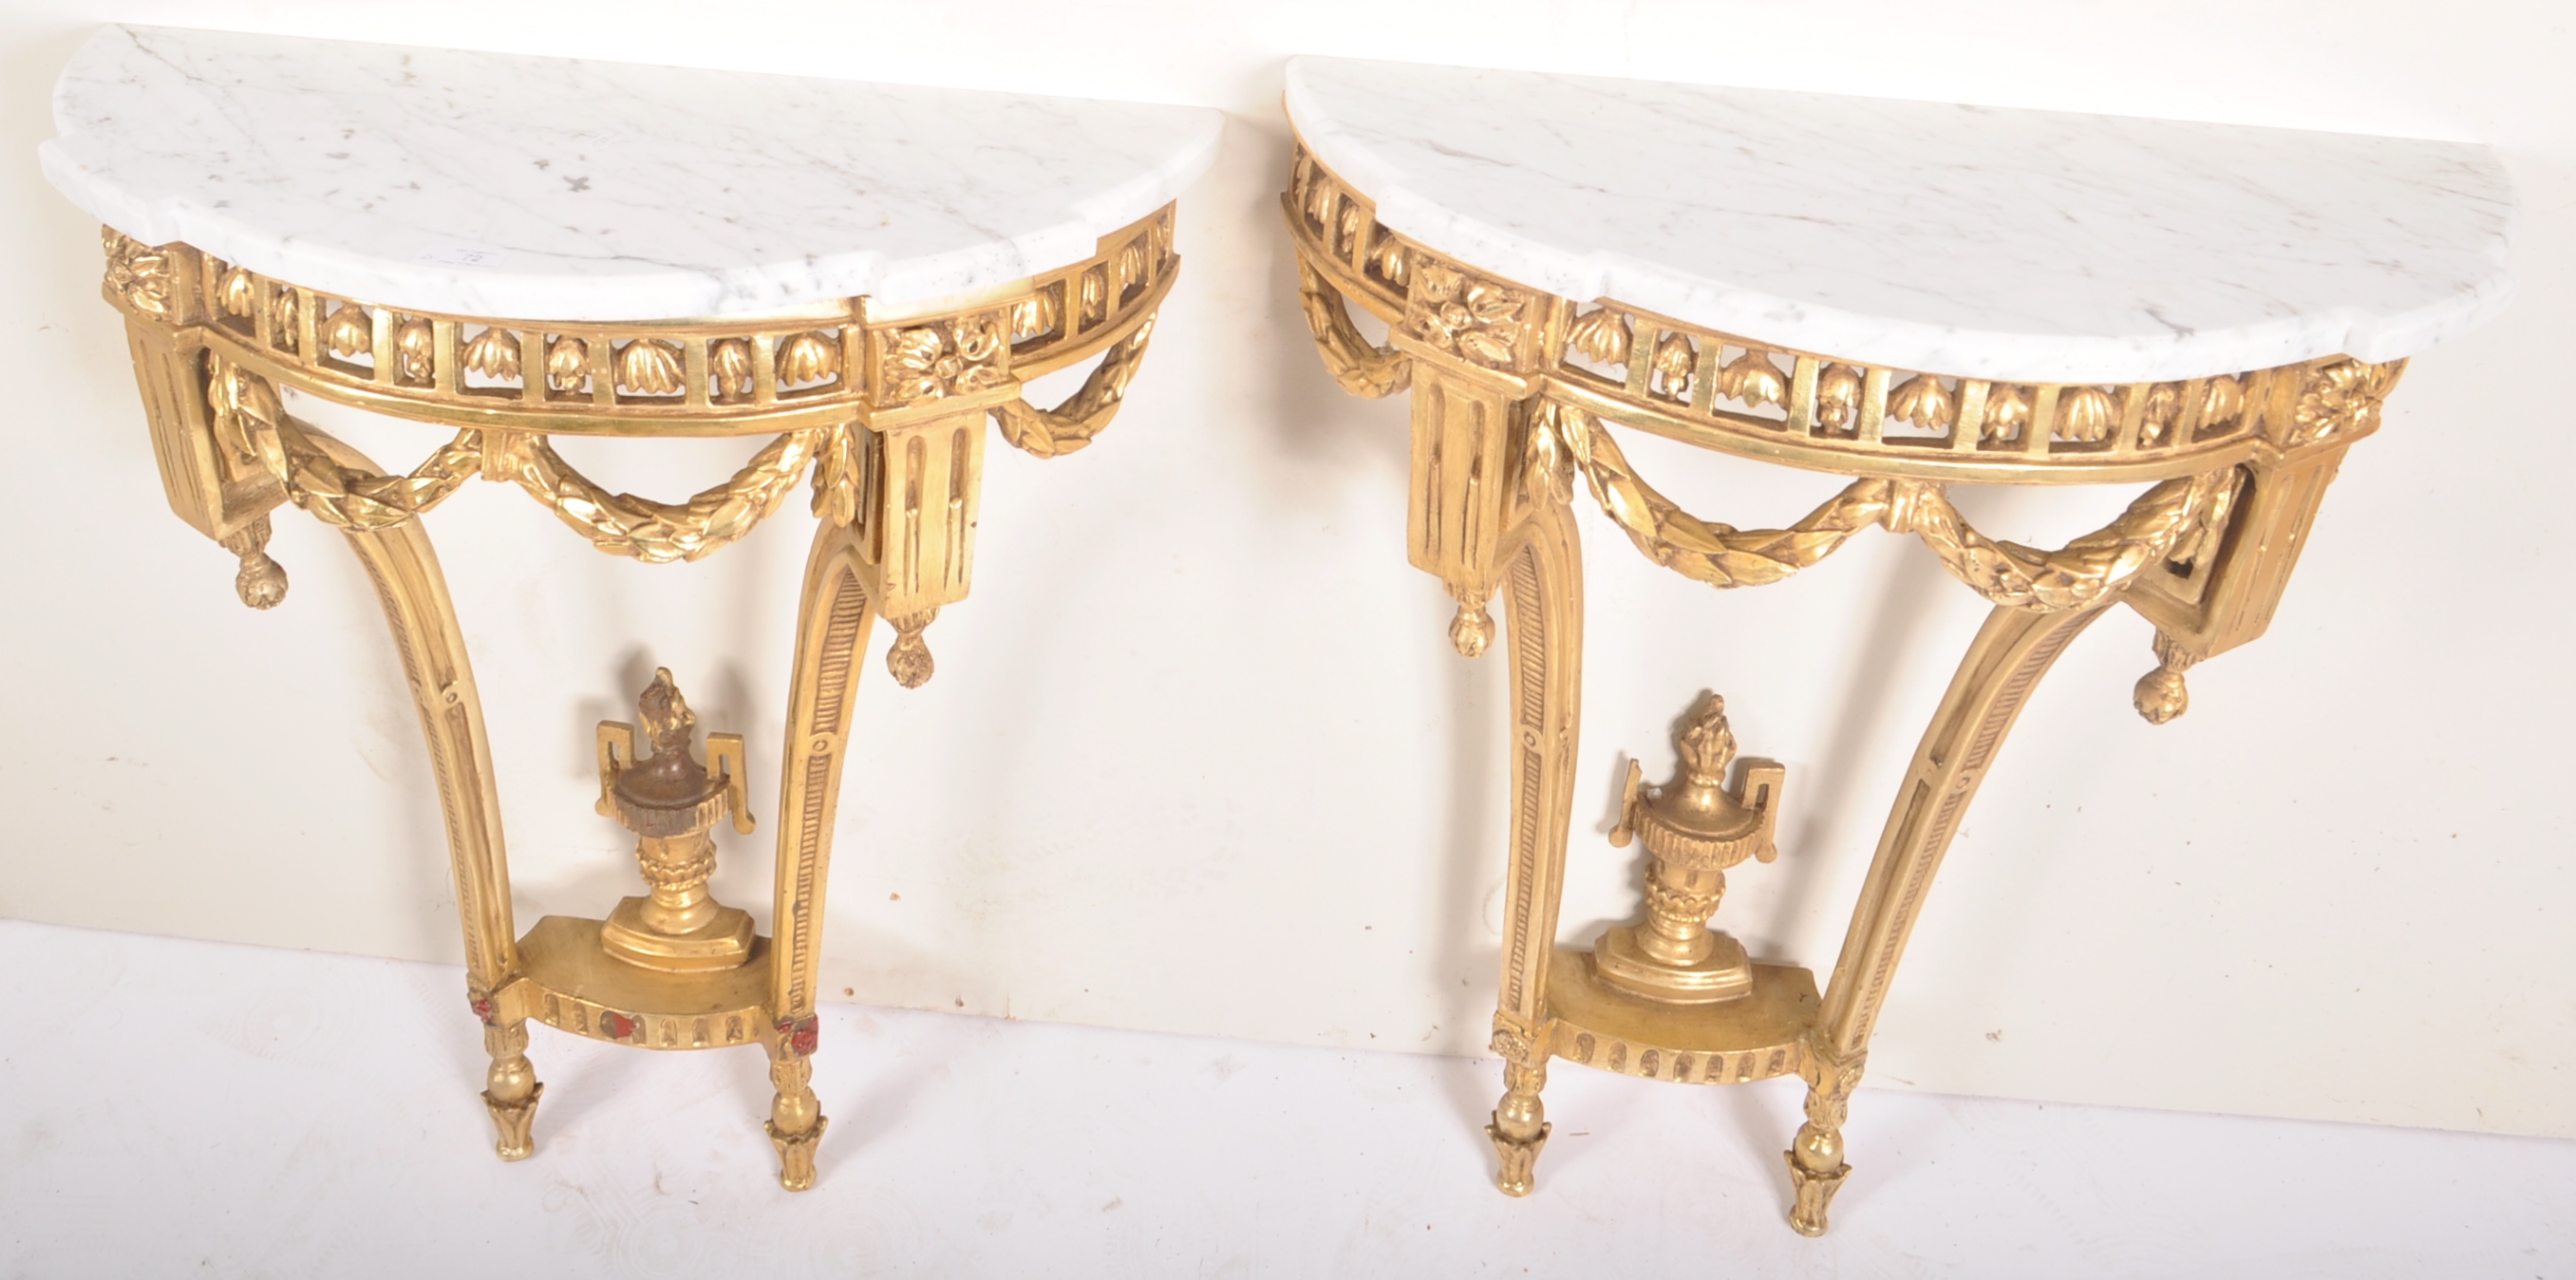 PAIR OF HOLLYWOOD REGENCY CONSOLE TABLES - Image 2 of 5